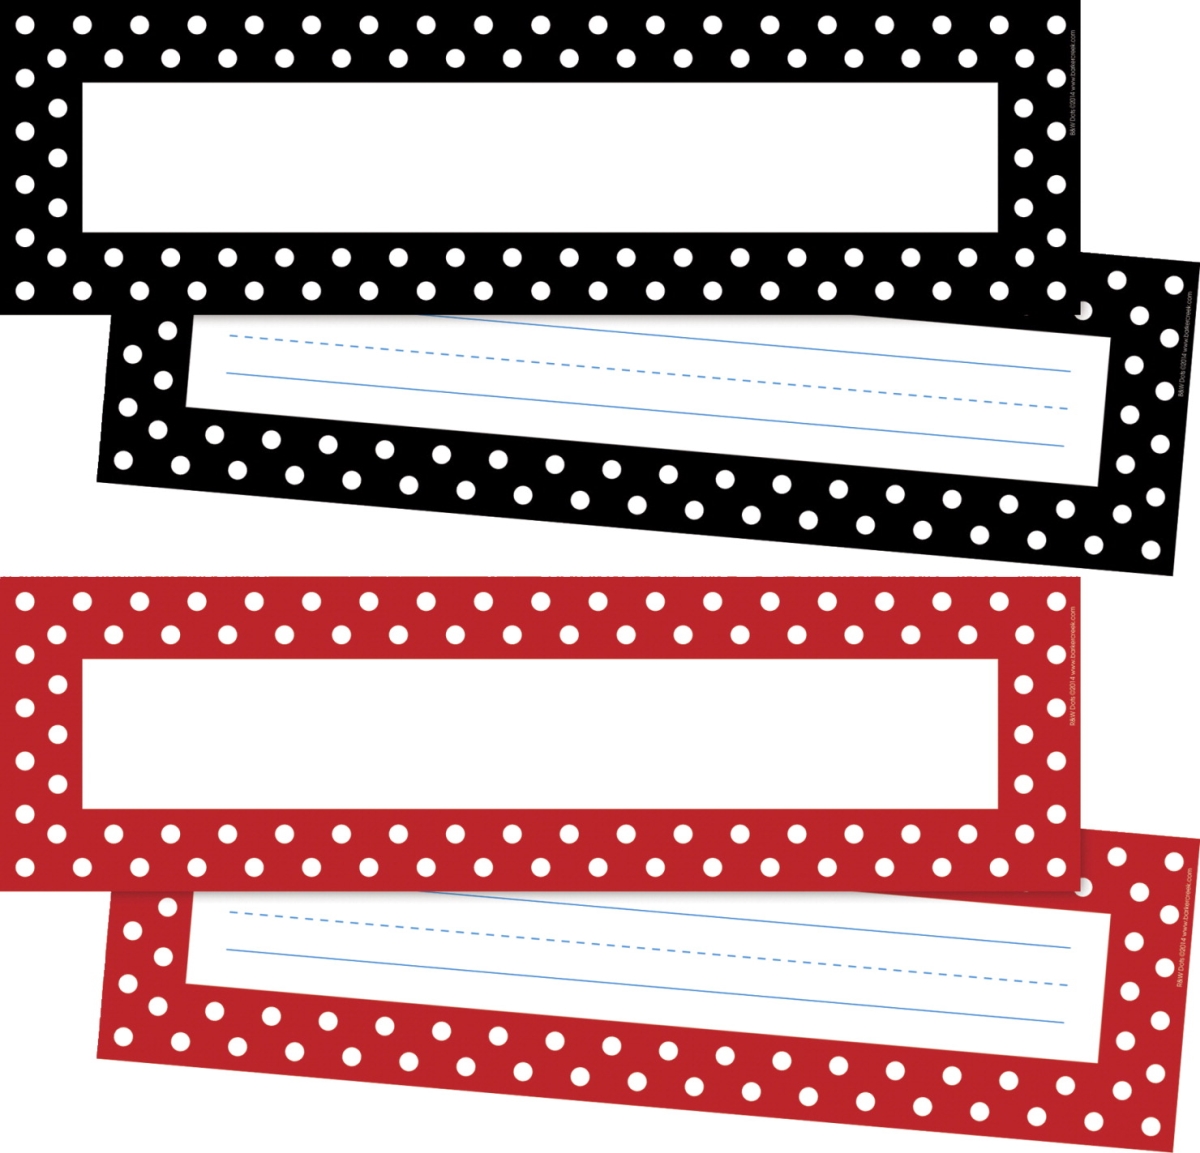 Picture of Barker Creek 2004977 12 x 3.5 in. 2 Designs Dots Jumbo Name Plate Set - 72 Piece